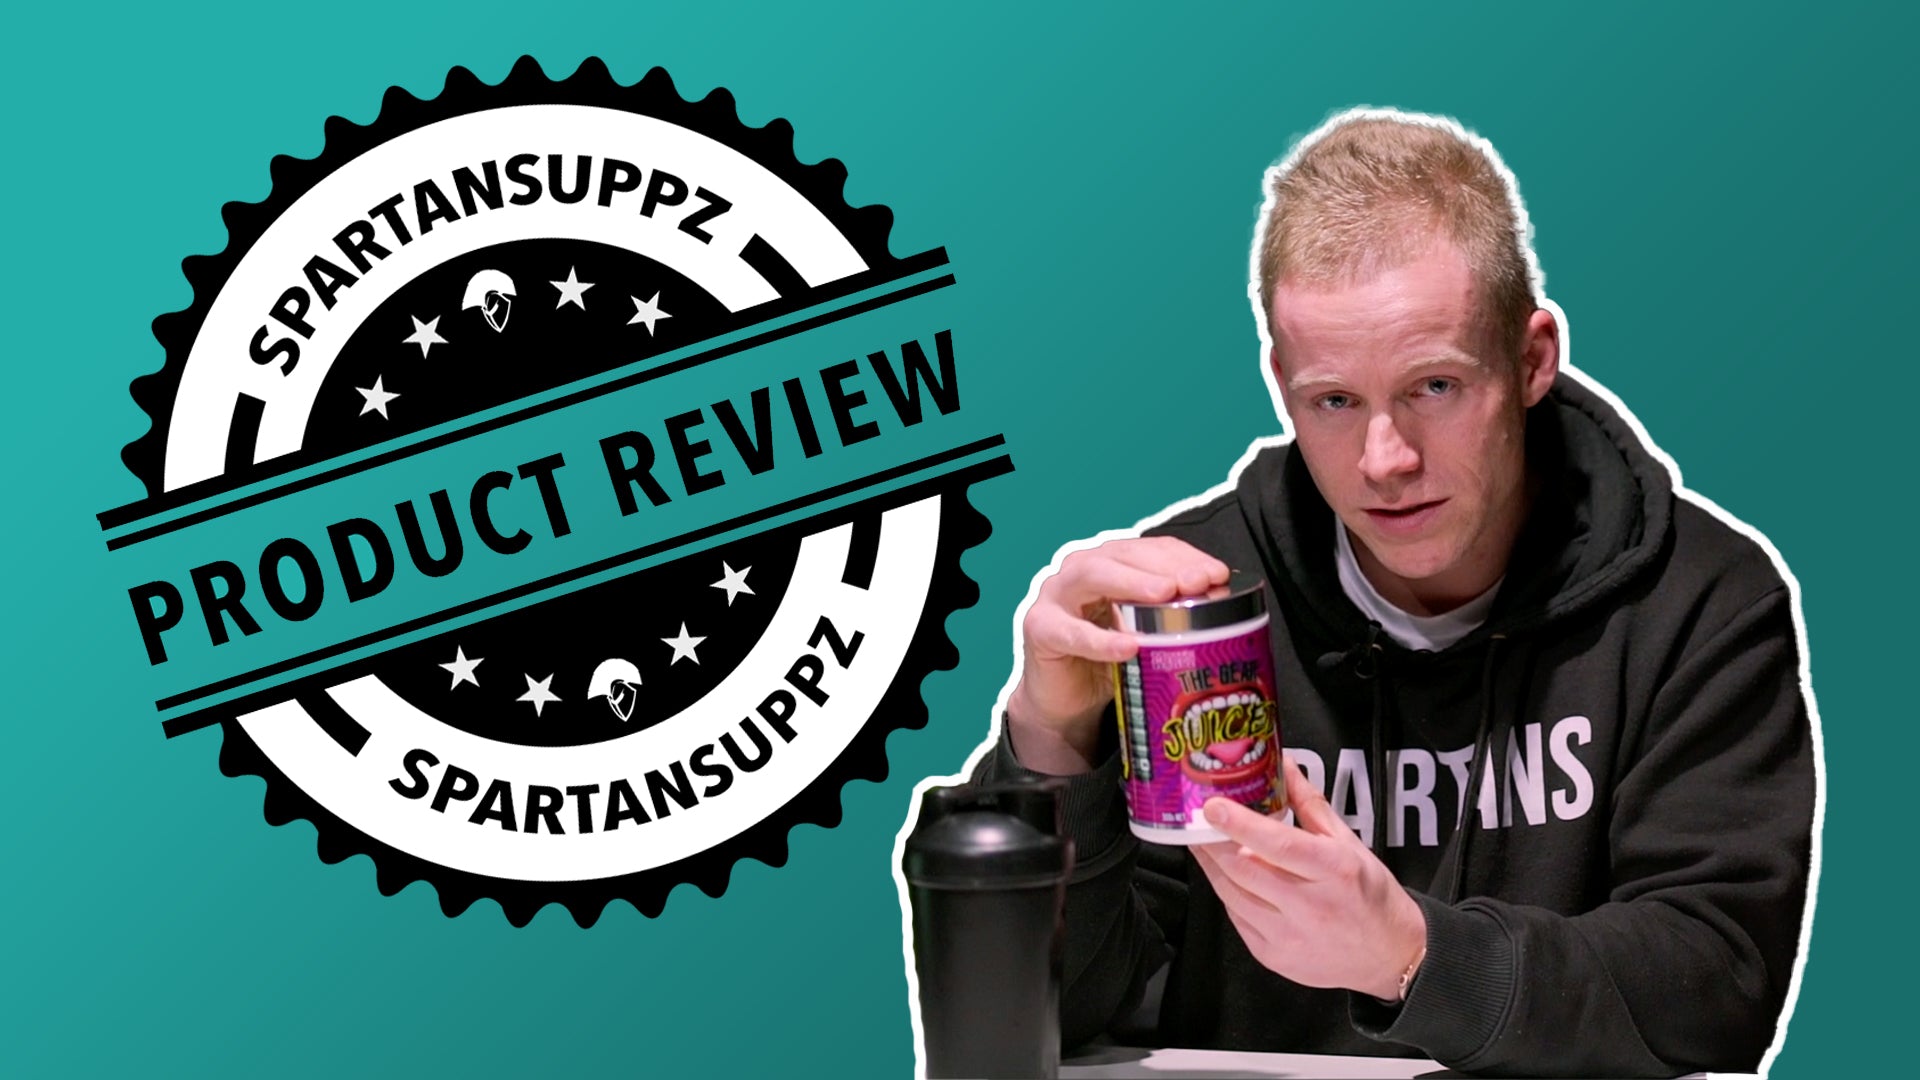 The Gear Juiced by Maxs Supplement Review